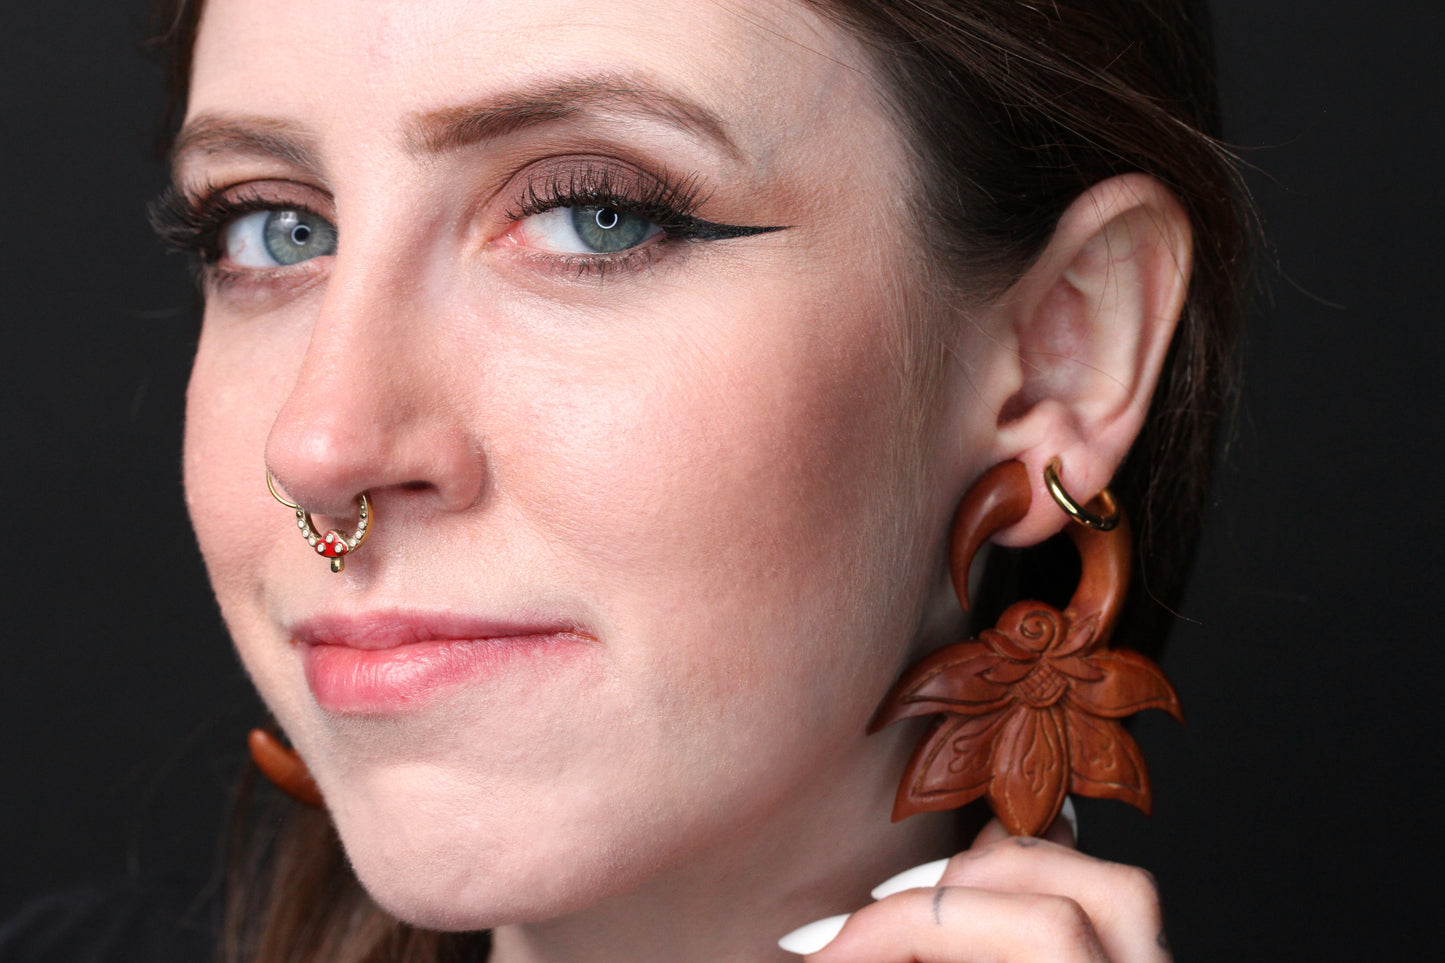 wooden gauges hangers stretched ears